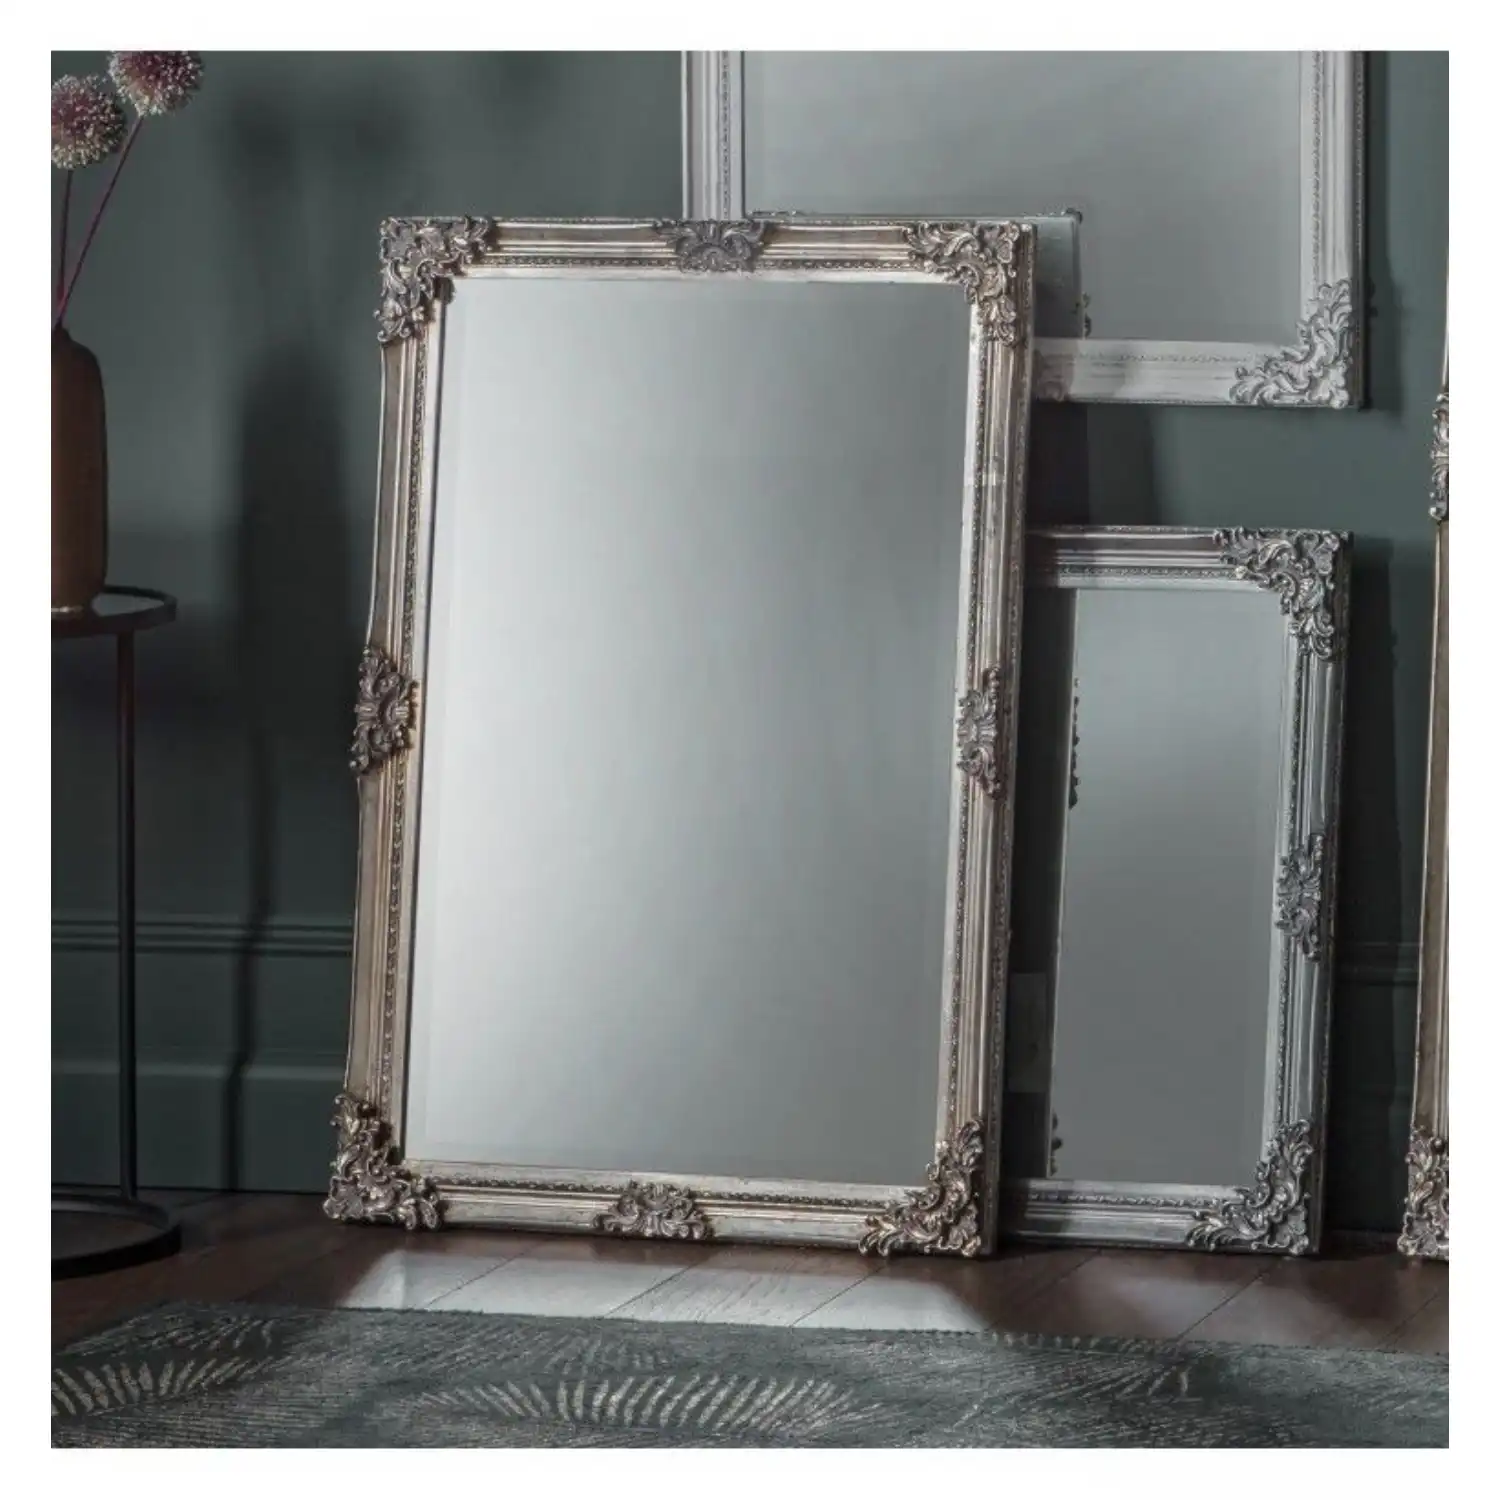 Vintage French Style Large Rectangle Ornate Decorative Silver Framed Wall Mirror 92x61x5cm